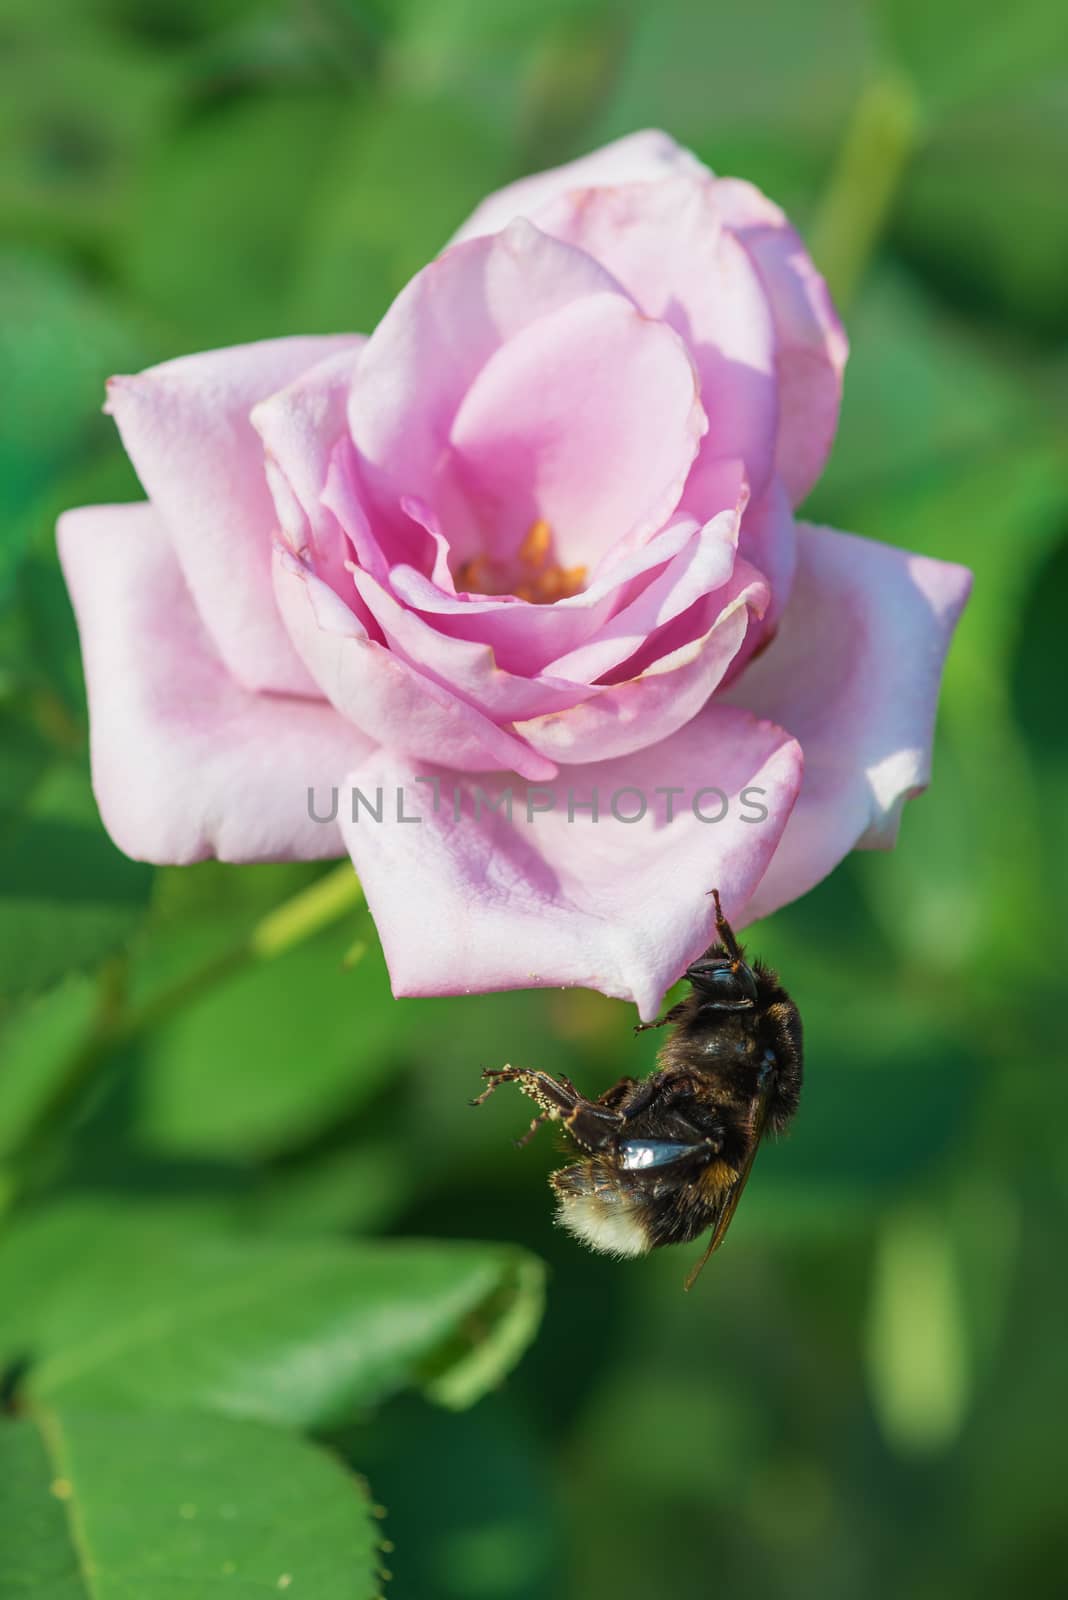 Bumblebee on a beautiful pink rose by Epitavi